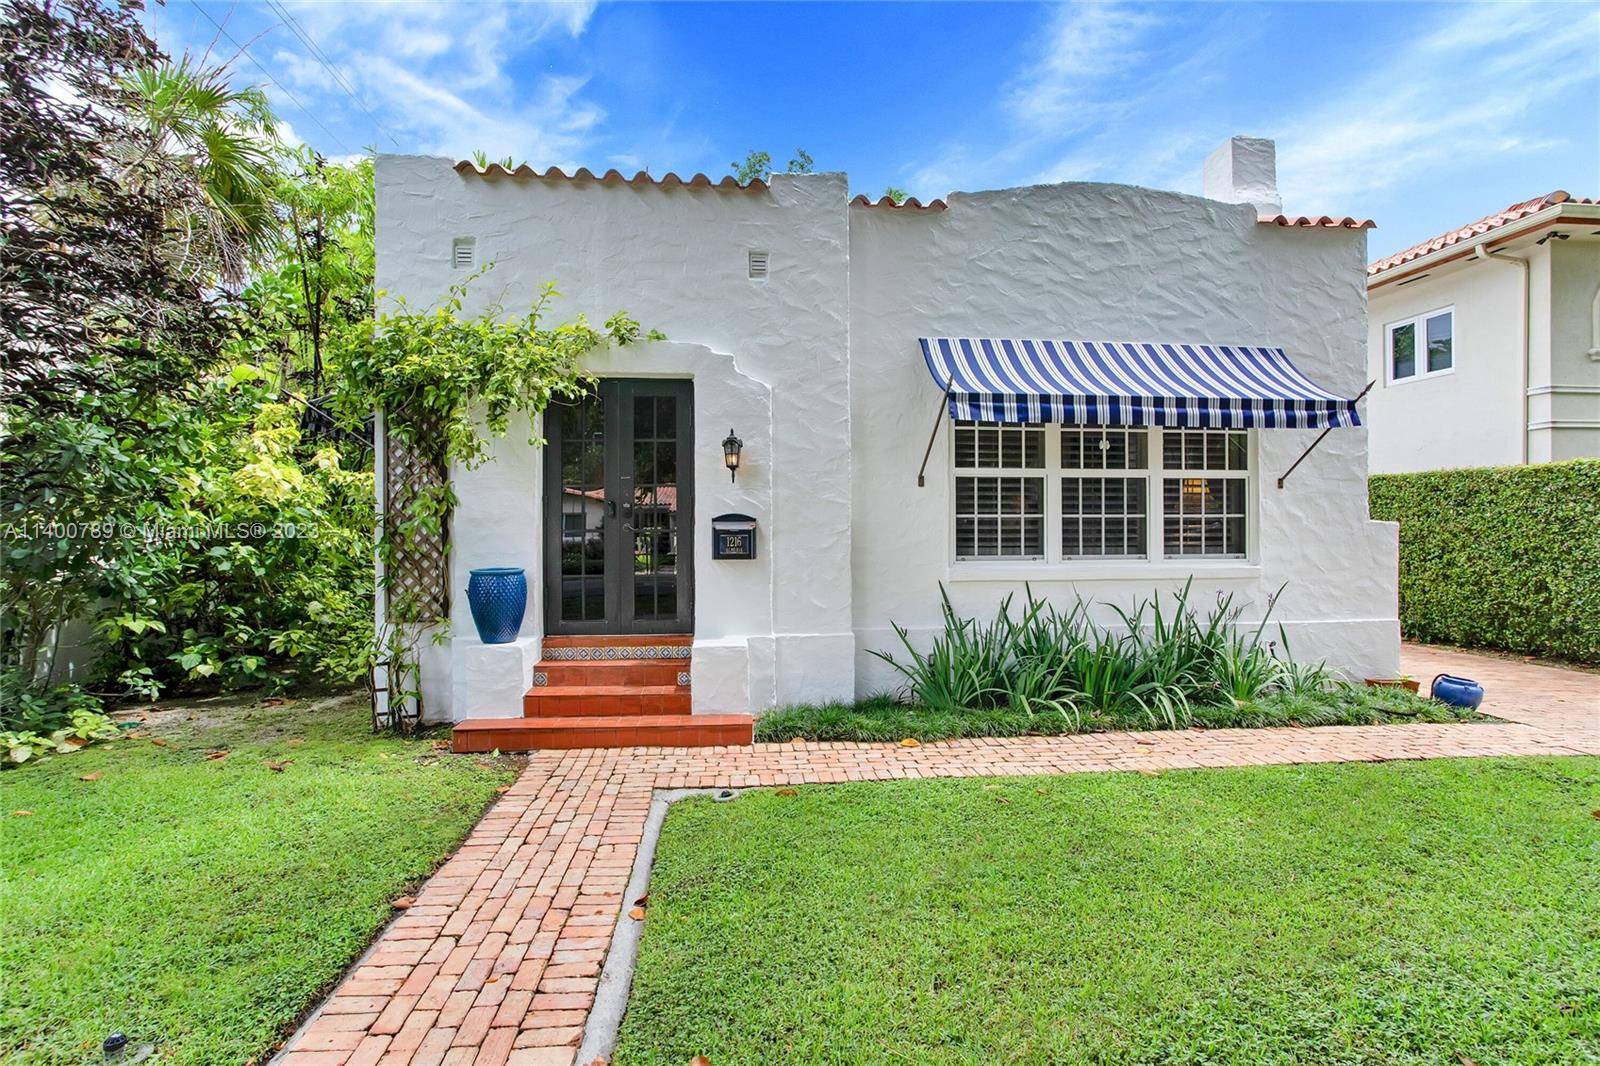 This exquisite Old Spanish home was built in 1923, then recently remodeled expanded to bring modernity to the property while maintaining its original charm.